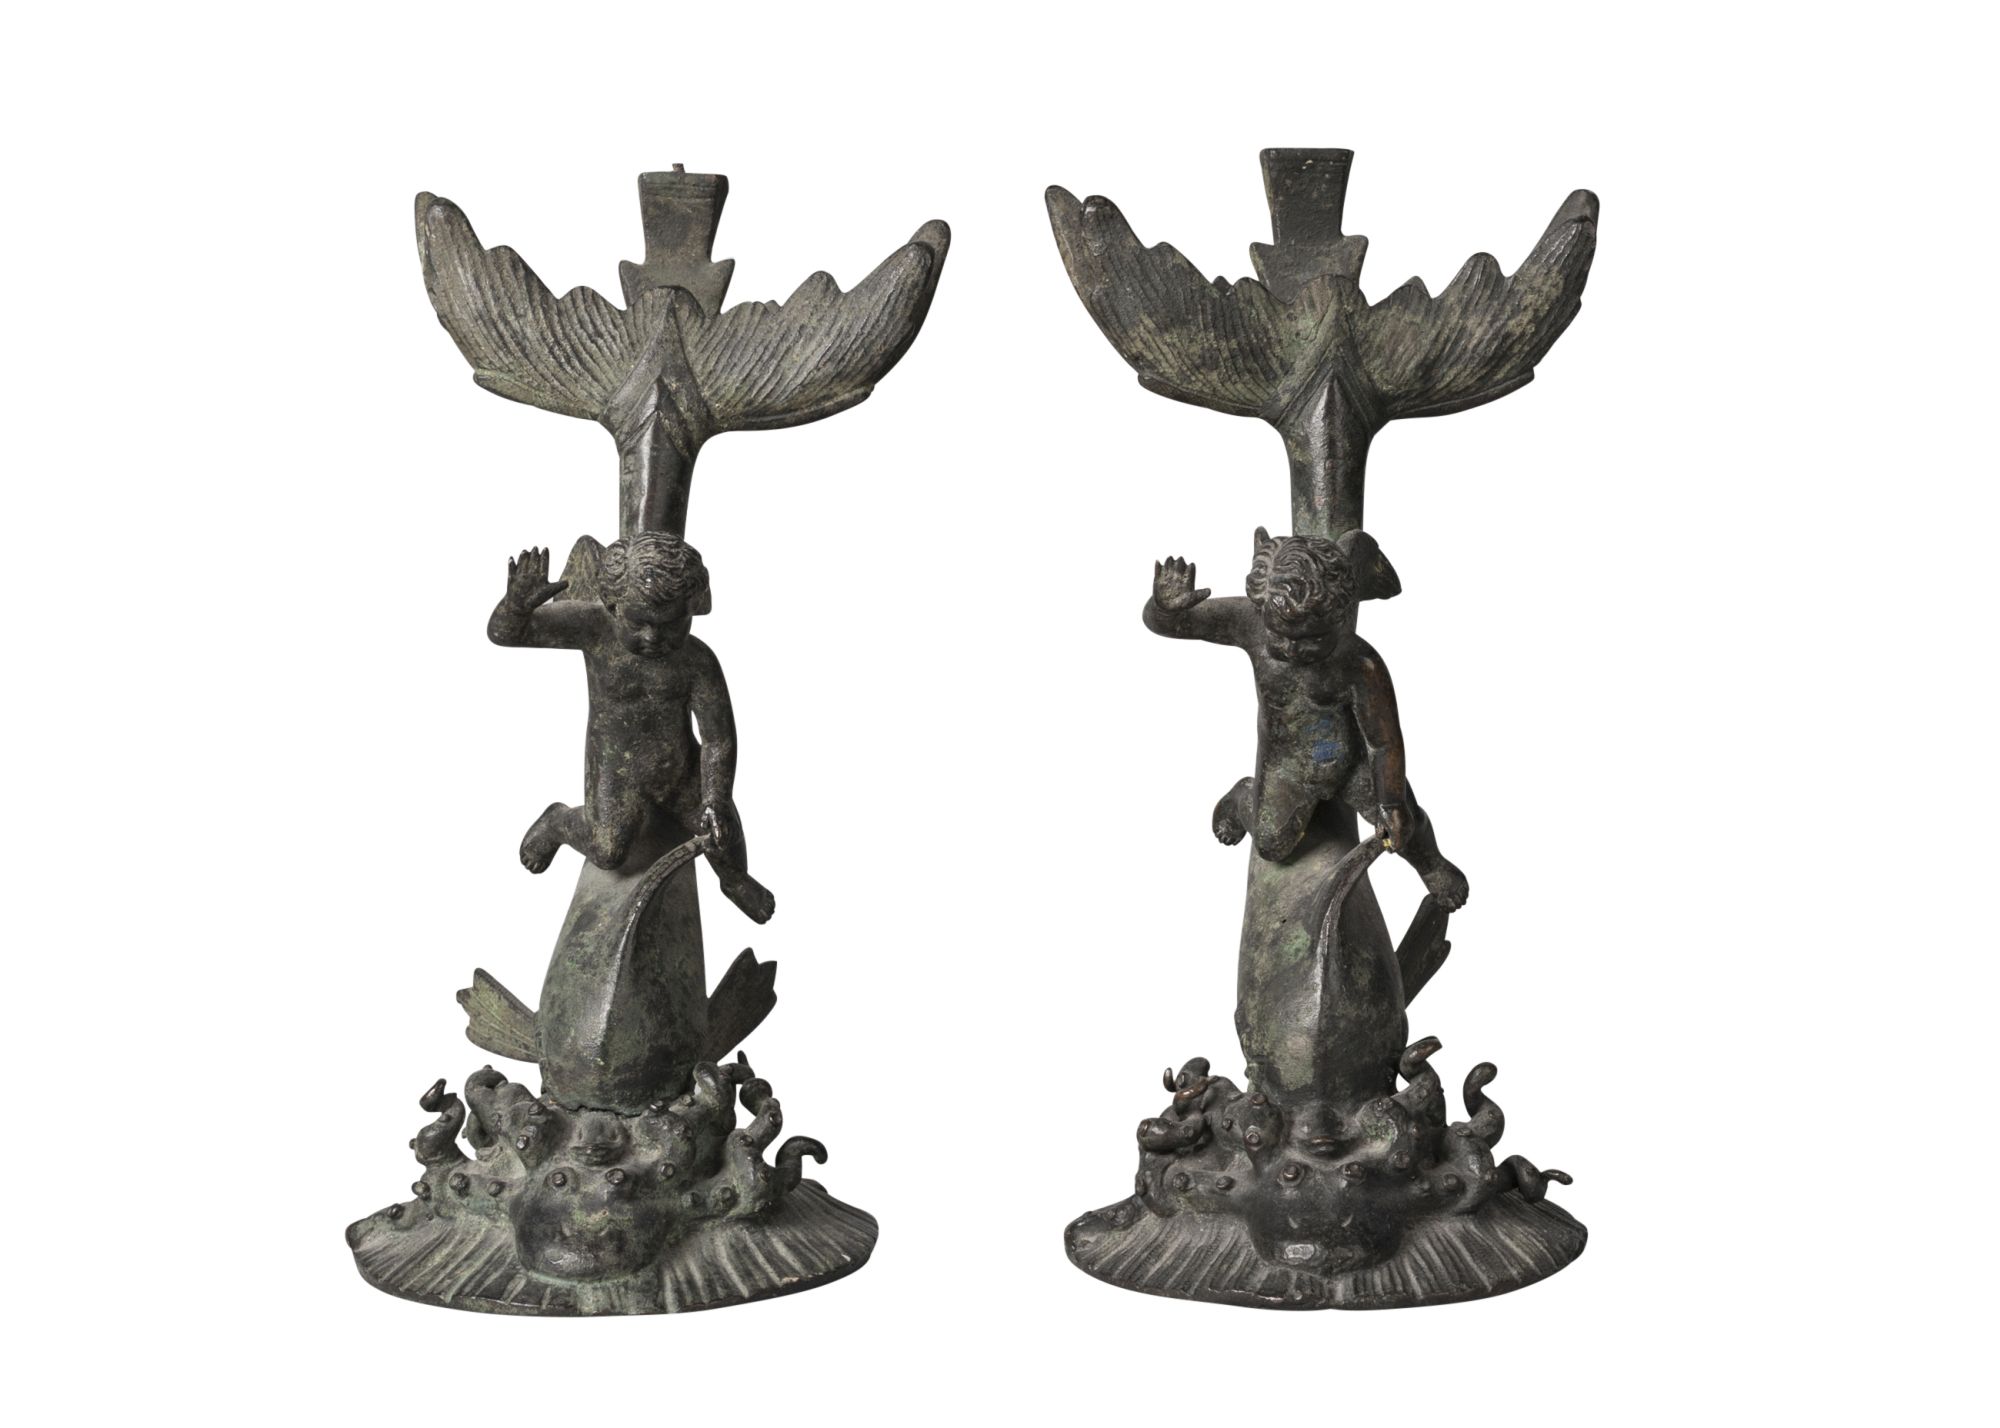 Two Neapolitan bronze mirror stands, after the Antique, possibly by the Chiurazzi foundry late - Image 2 of 2